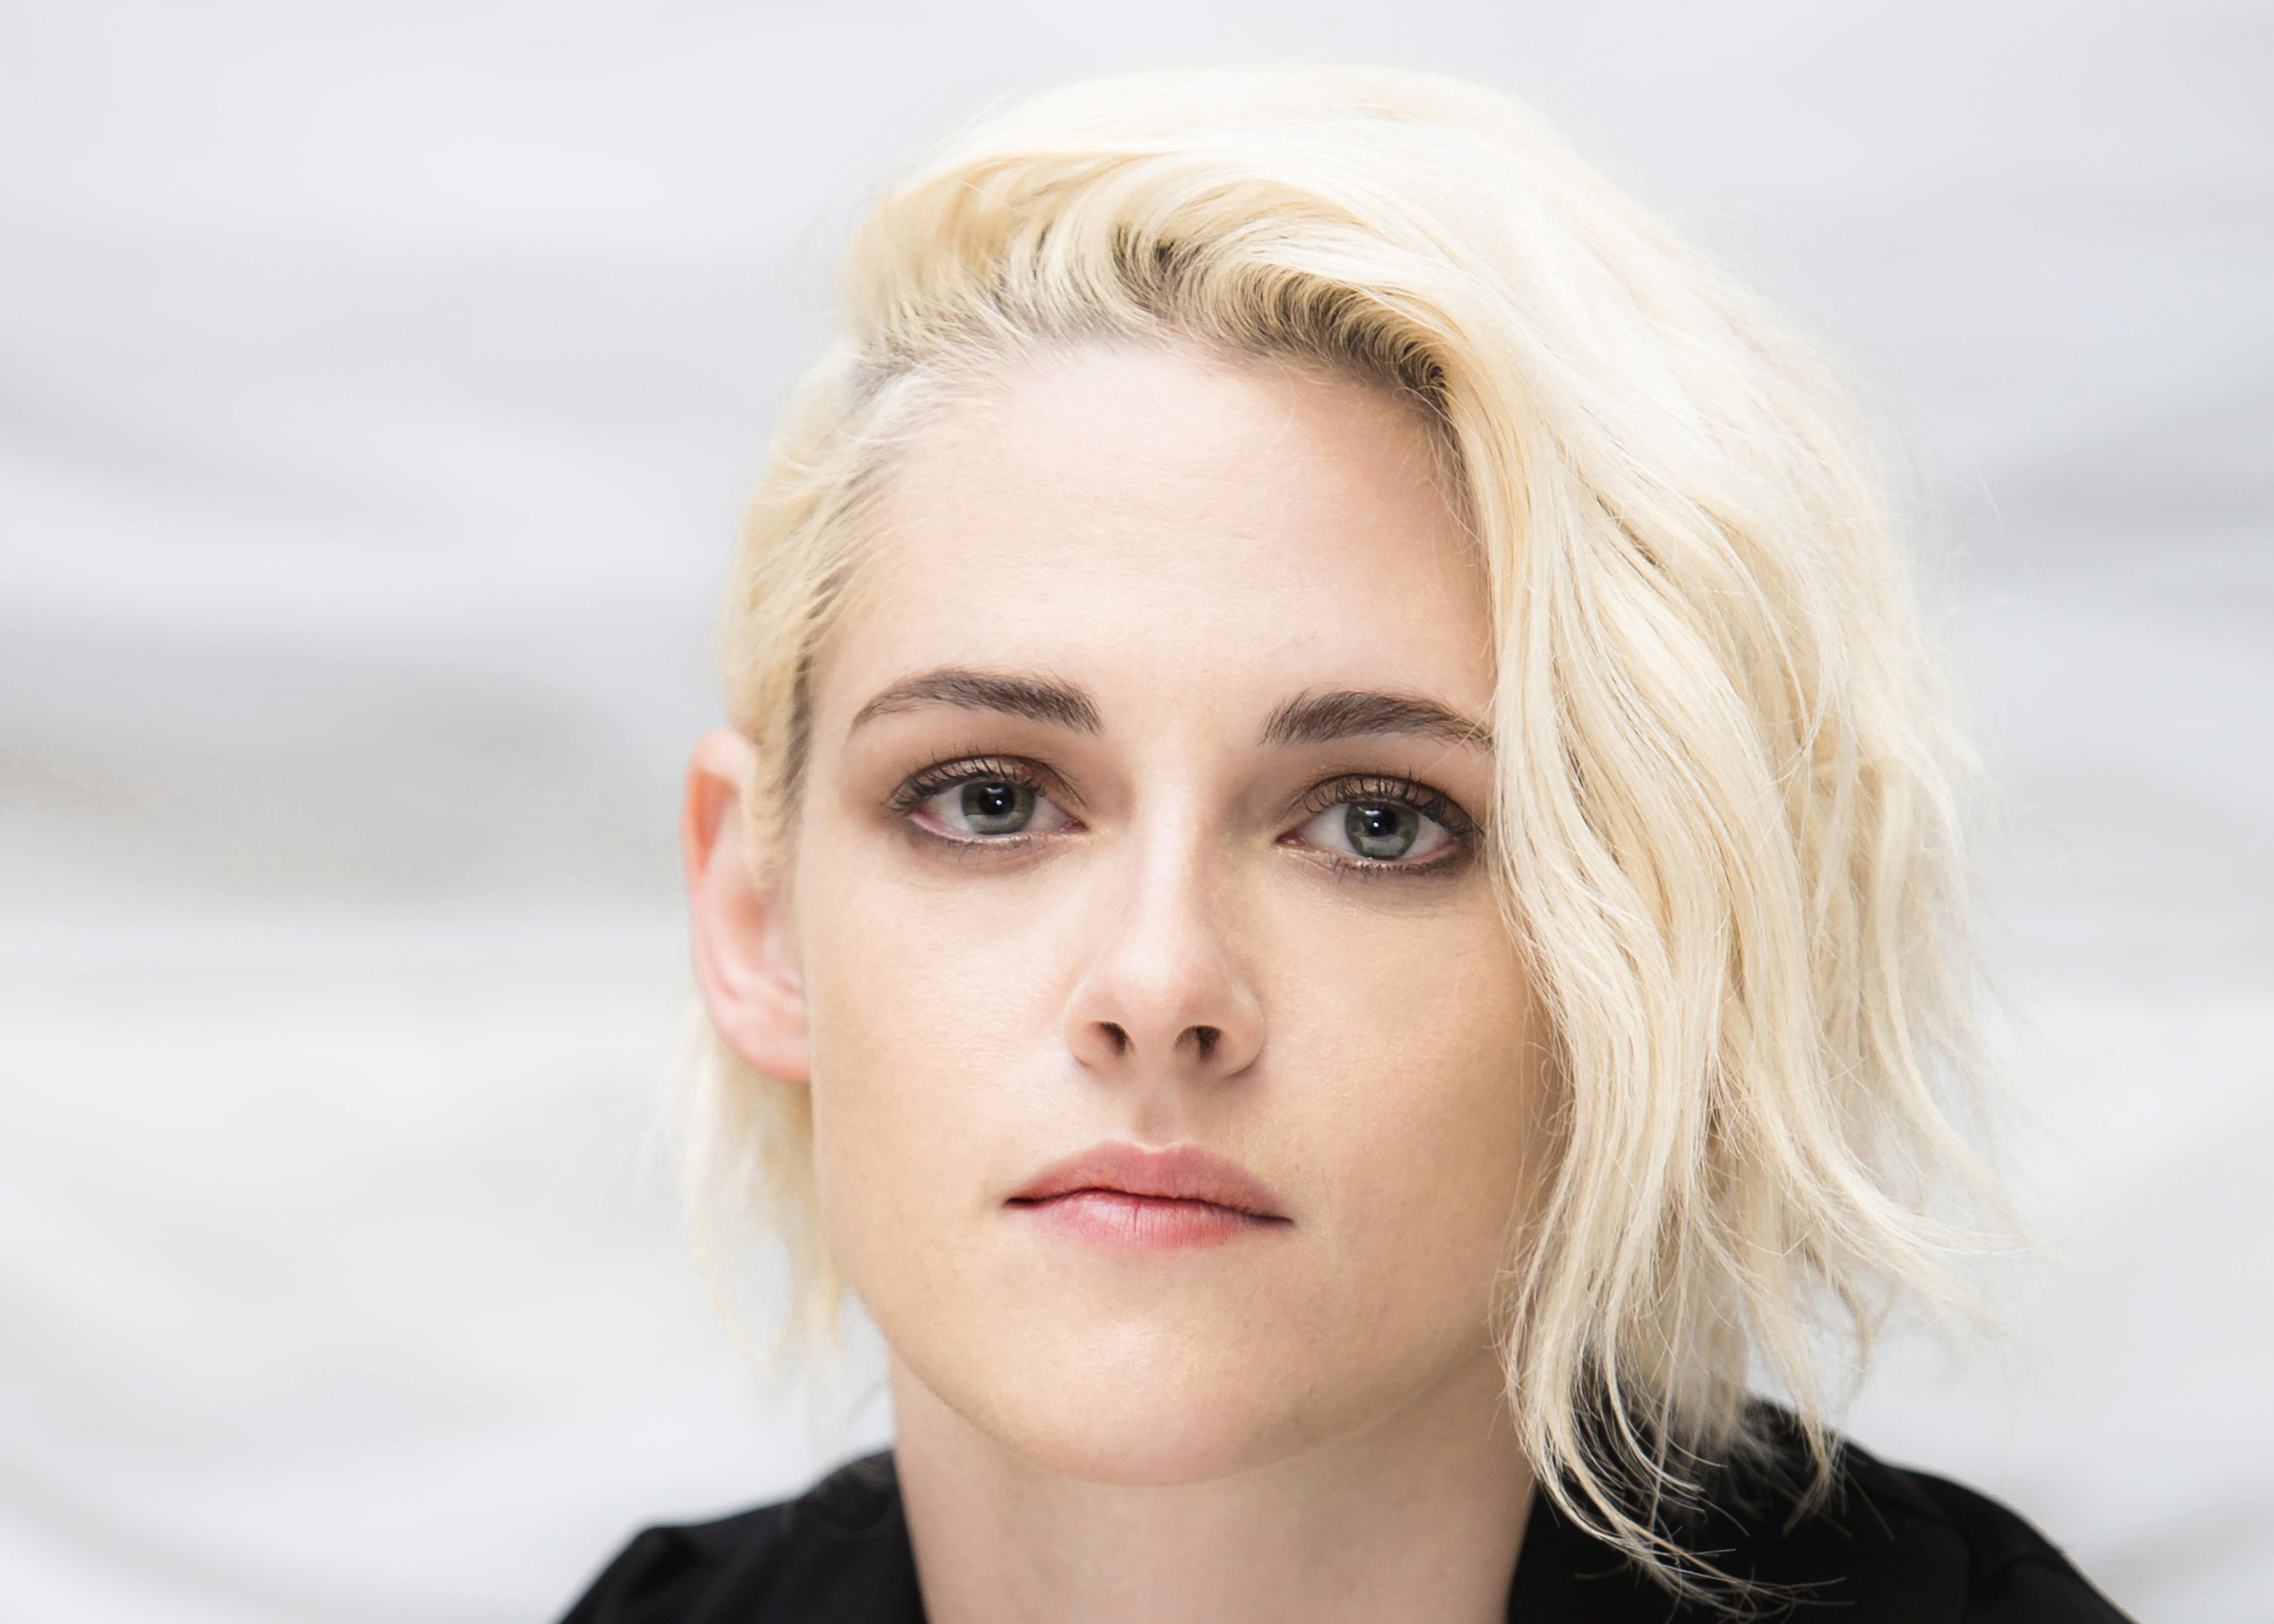 4k Kristen Stewart, HD Celebrities, 4k Wallpapers, Images, Backgrounds,  Photos and Pictures